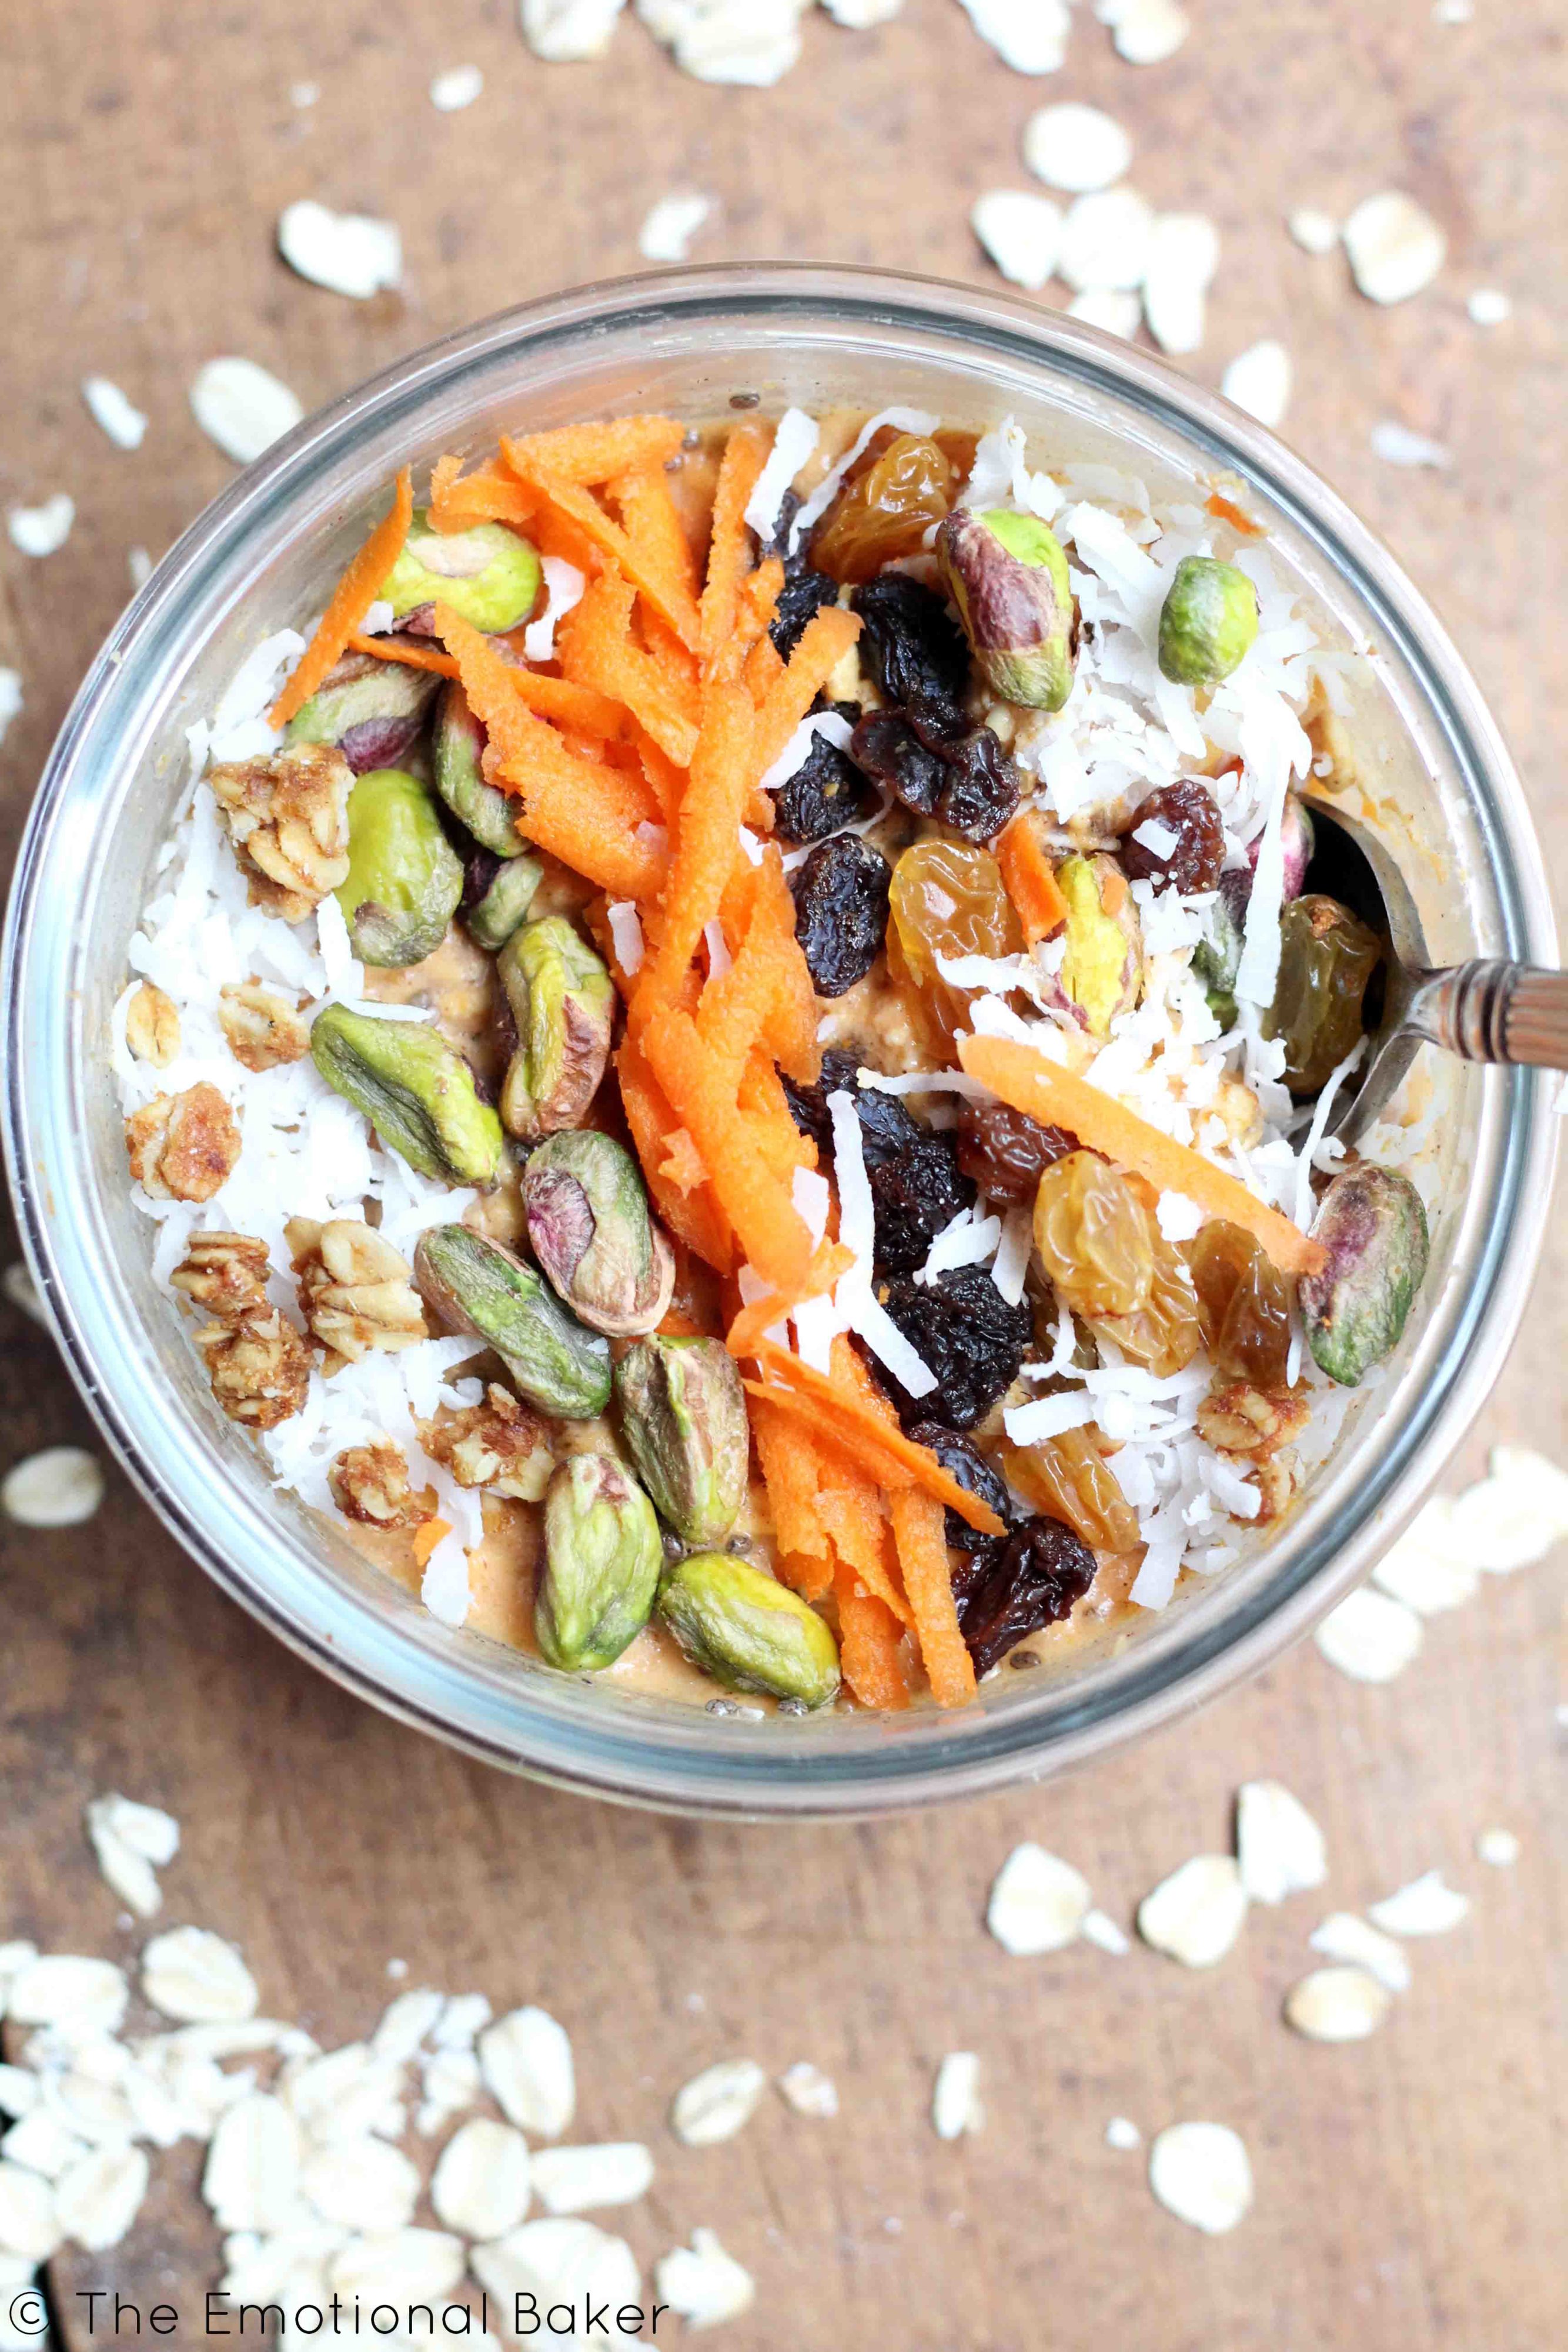 Carrot Cake for breakfast? Yes, Please! These overnight oats are bursting with flavor and will energize your mornings.